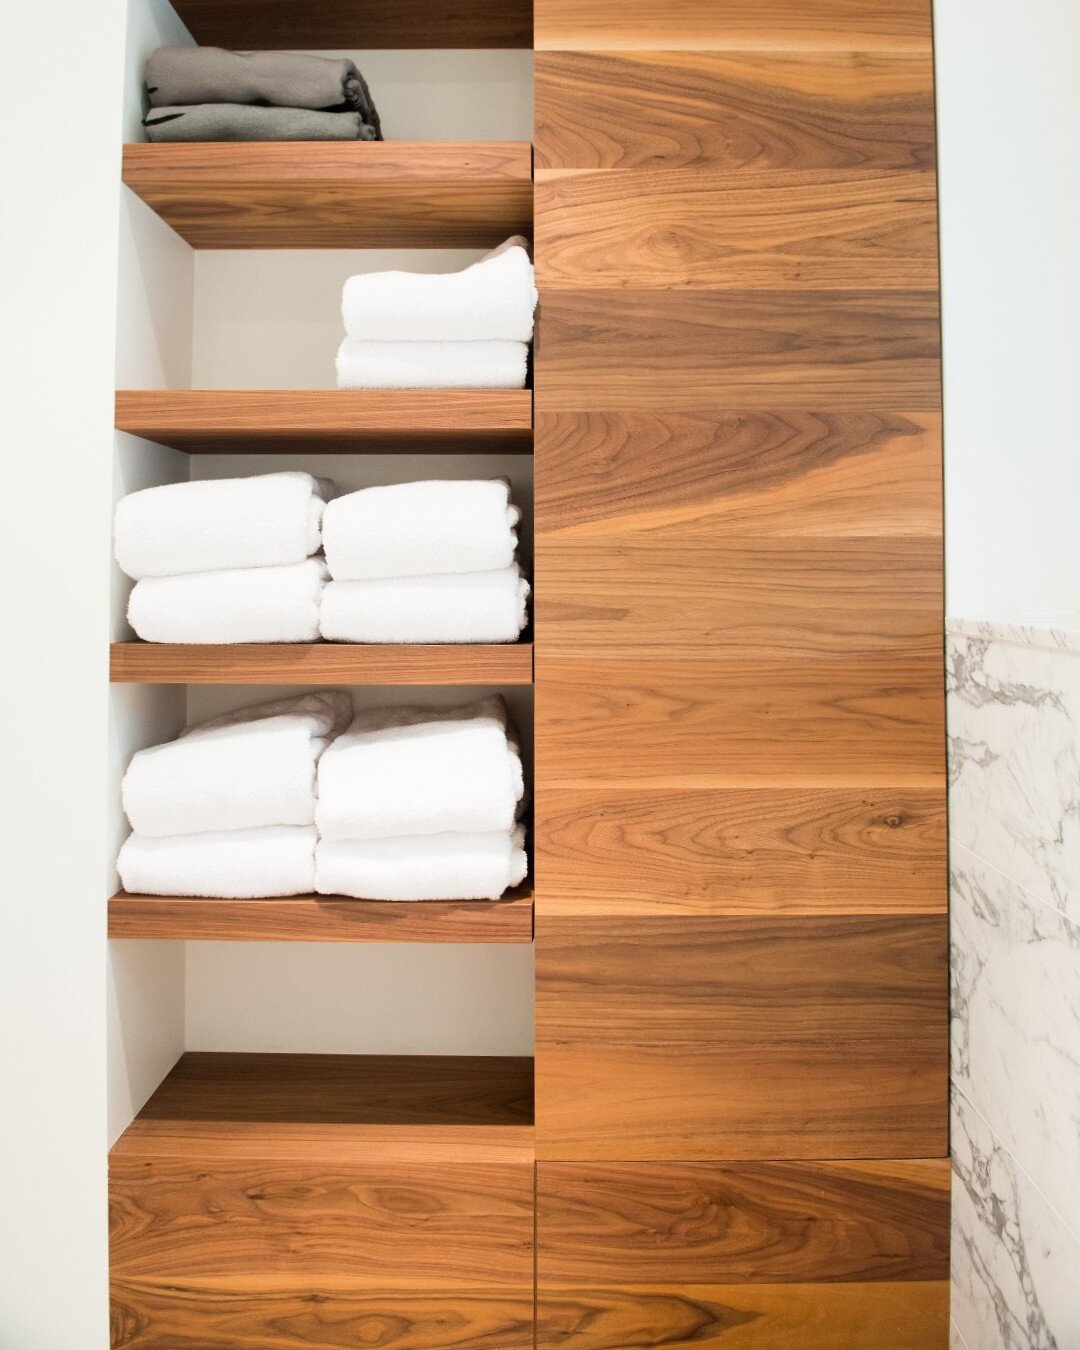 If you're thinking &quot;I've never seen a towel closet with no doors before&quot;, that's because you've never seen one pretty enough not to need them 😍😍

#whistlercabin #seatosky #custommillworkwhistler #hardwood #interiordesign #millwork #woodwo